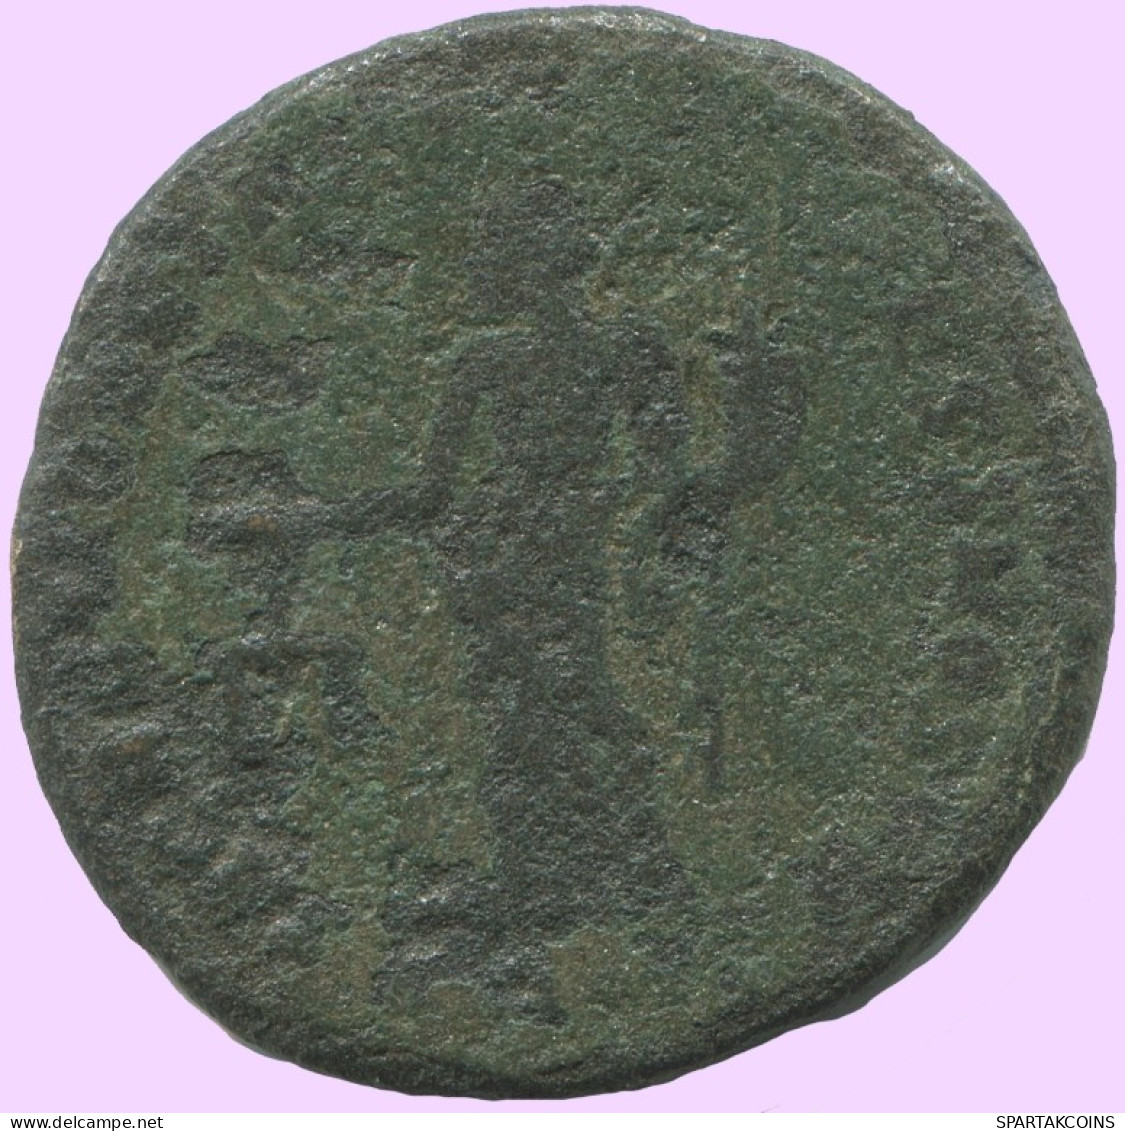 LATE ROMAN EMPIRE Follis Antique Authentique Roman Pièce 7.2g/26mm #ANT2160.7.F.A - The End Of Empire (363 AD To 476 AD)